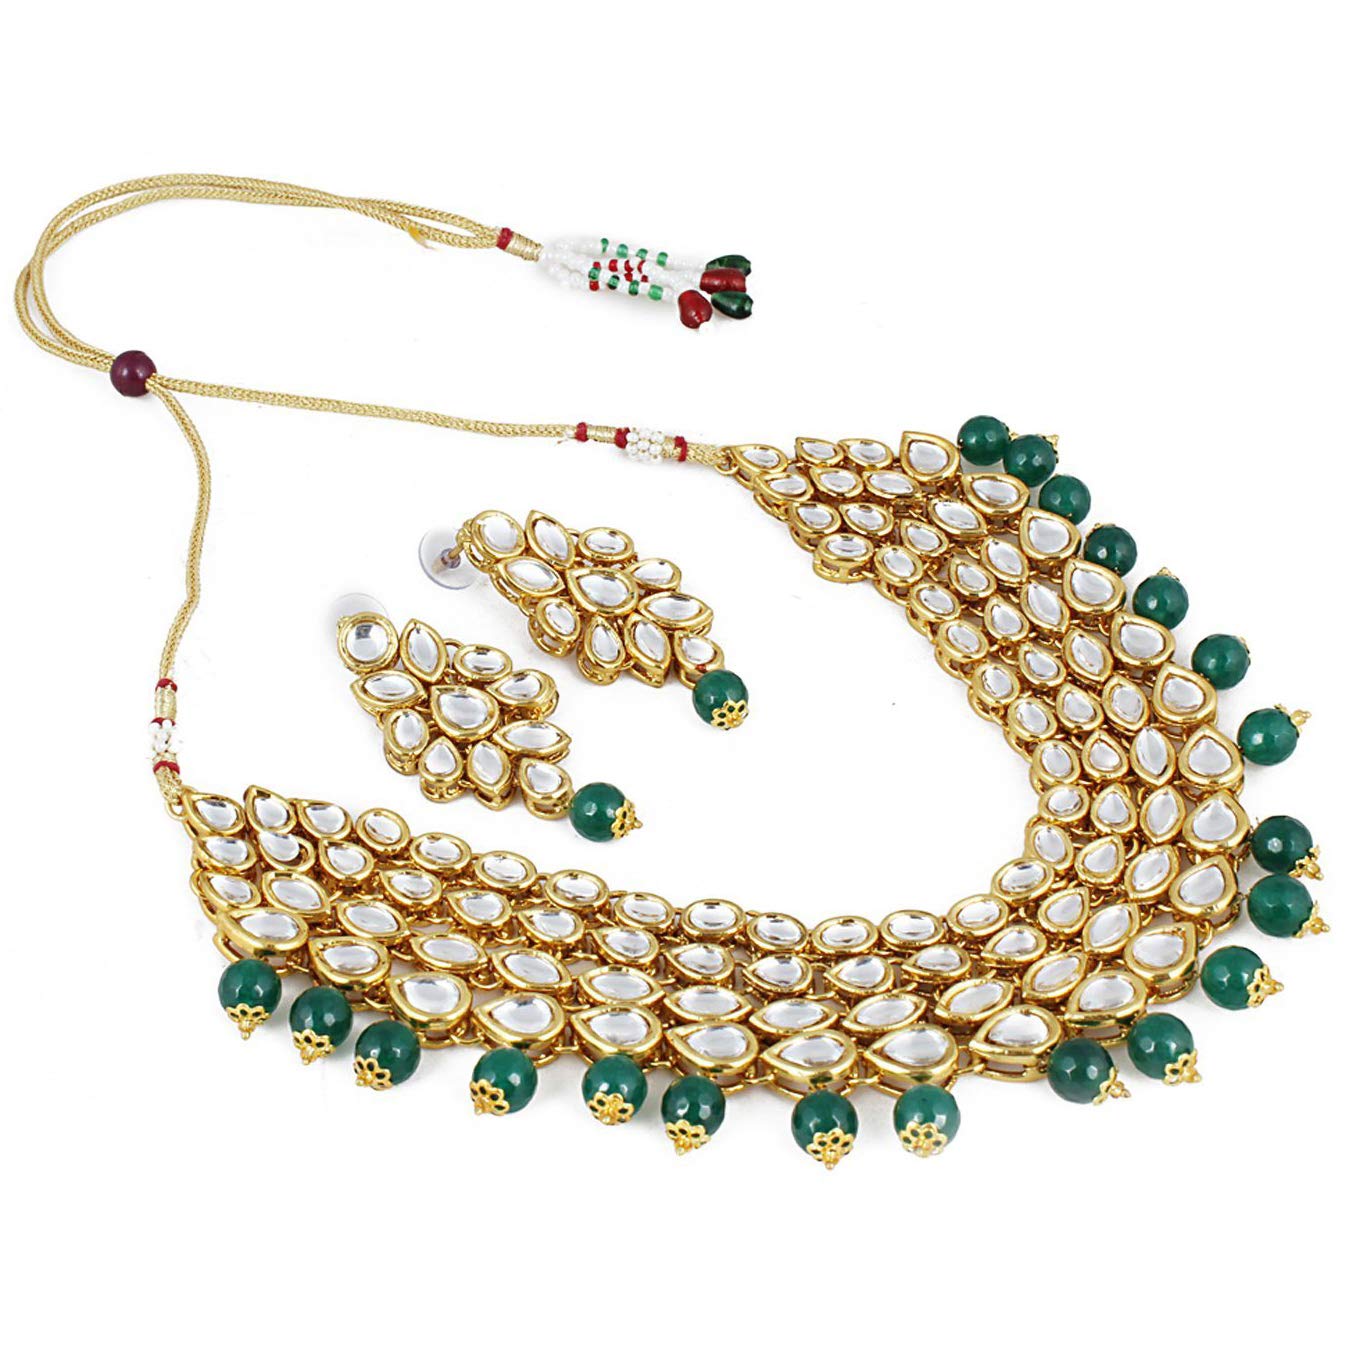 Shining Diva Fashion Green Kundan Stylish Necklace Set for Women Wedding Traditional Jewellery Set with Earrings for Women and Girls (9837s), One Size